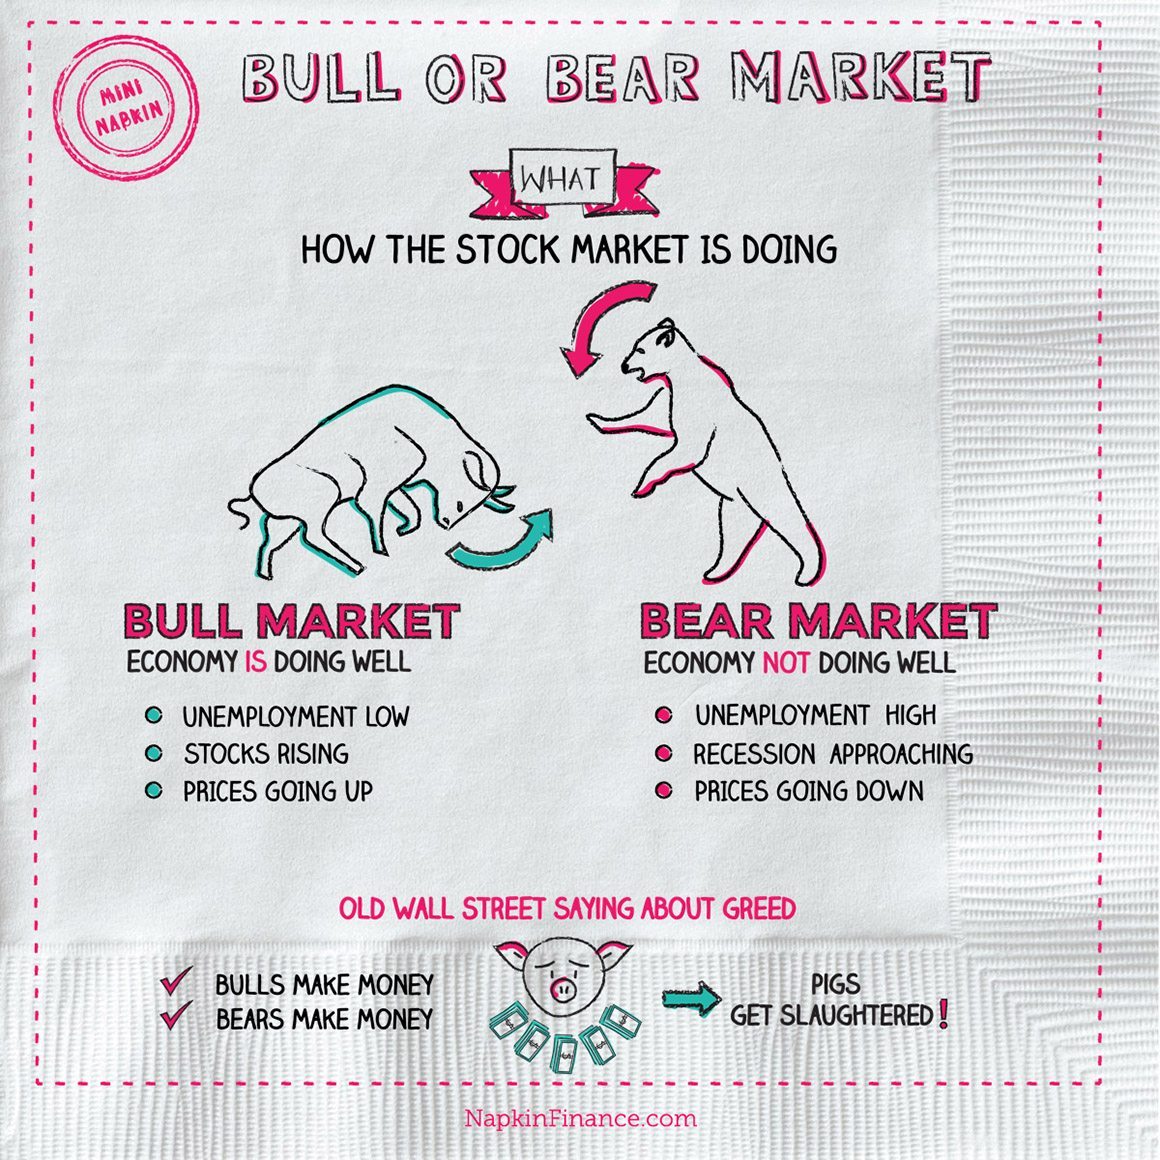 a bear market occurs when investors are pessimistic about the economy